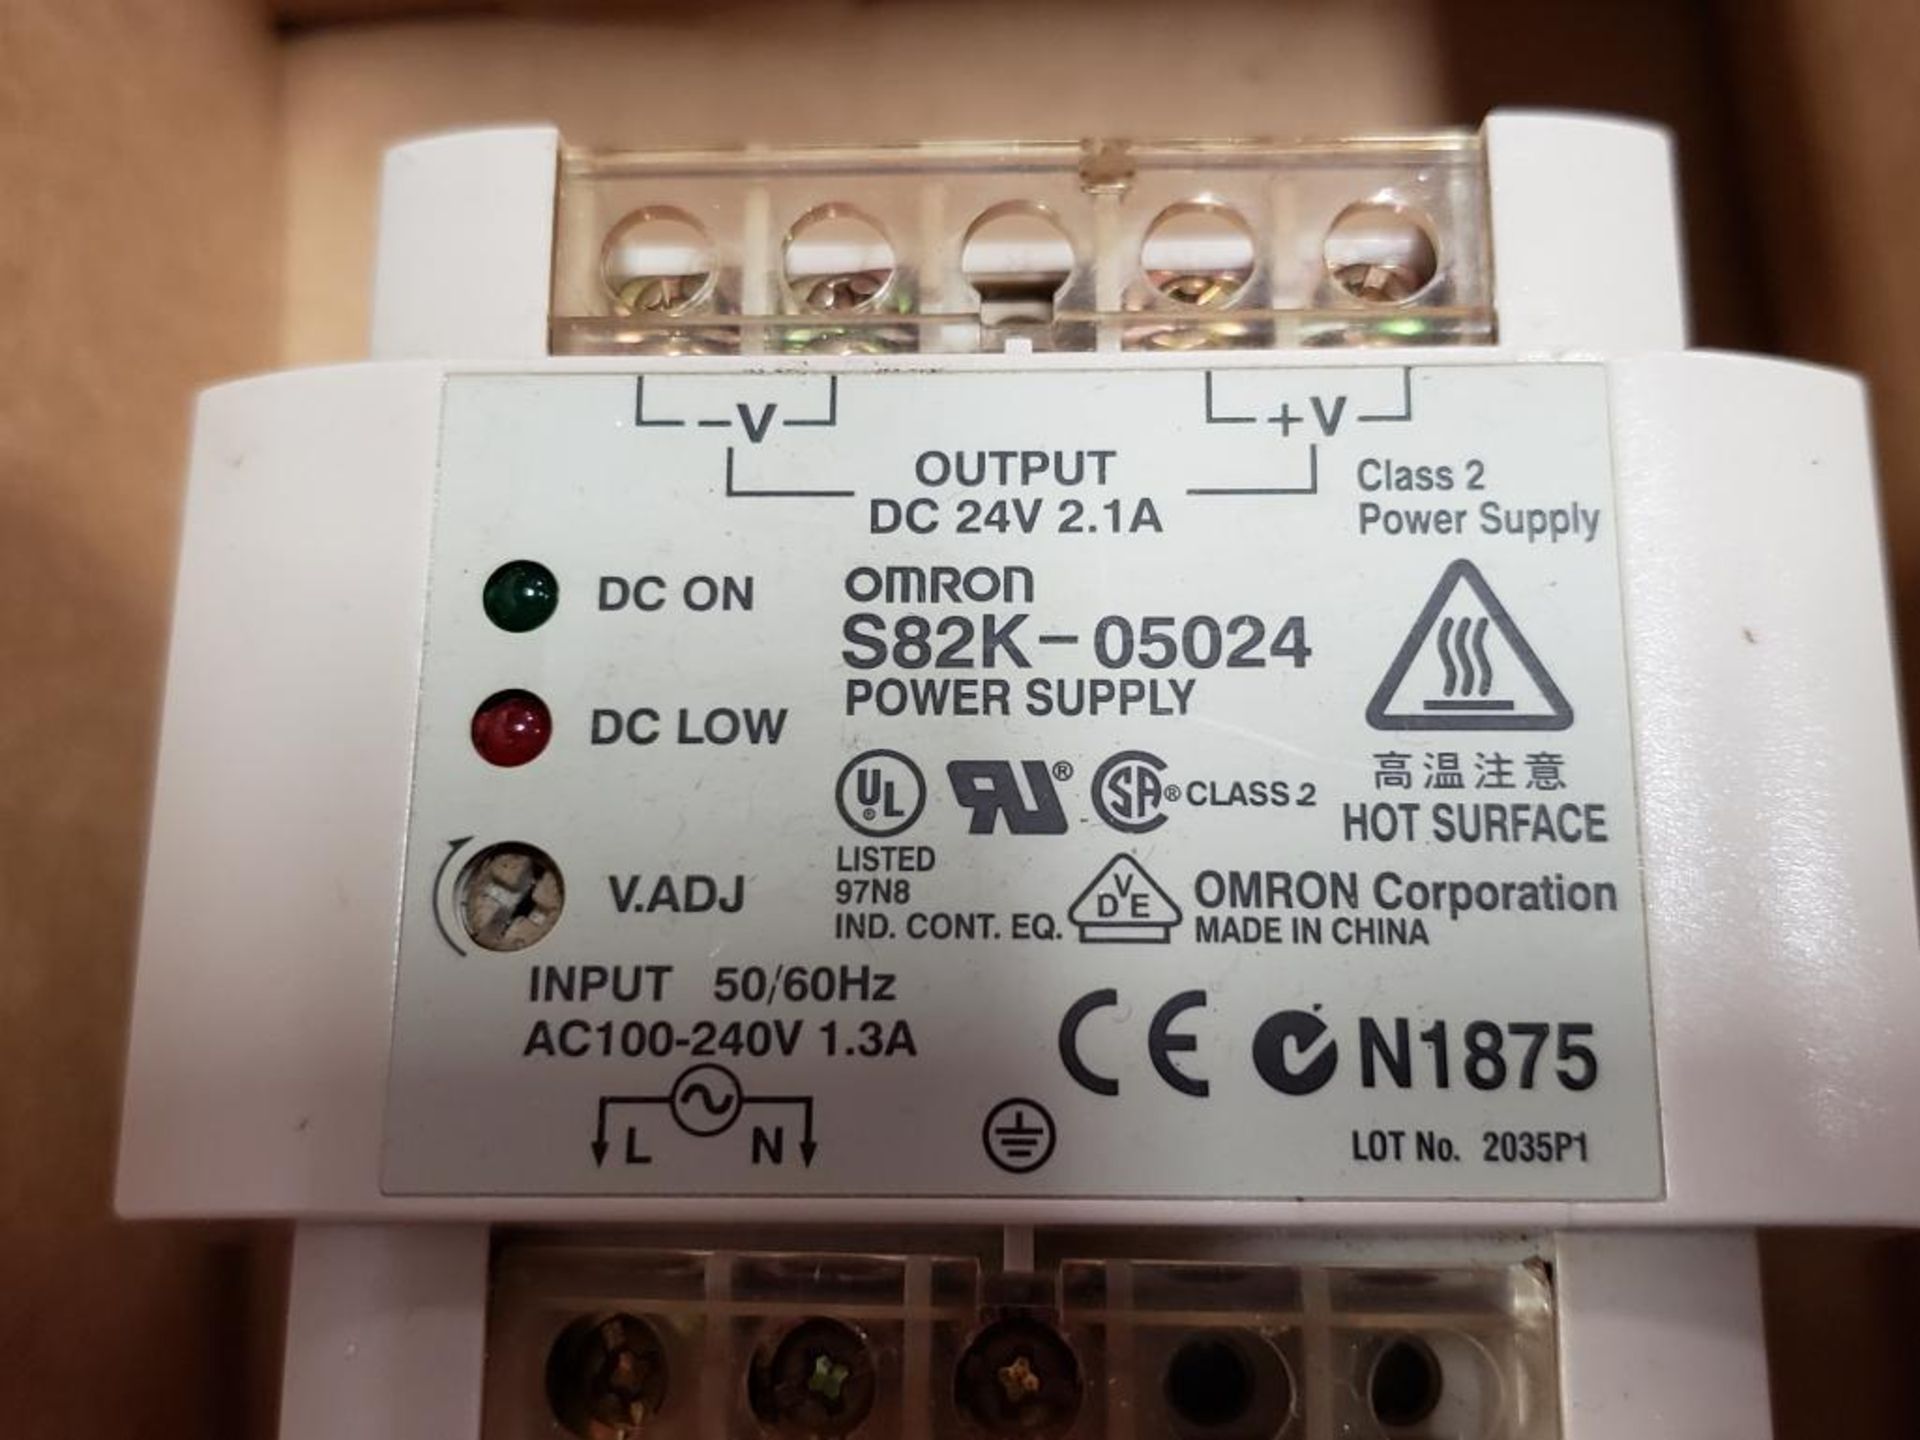 Omron S82K-05024 power supply. - Image 4 of 4